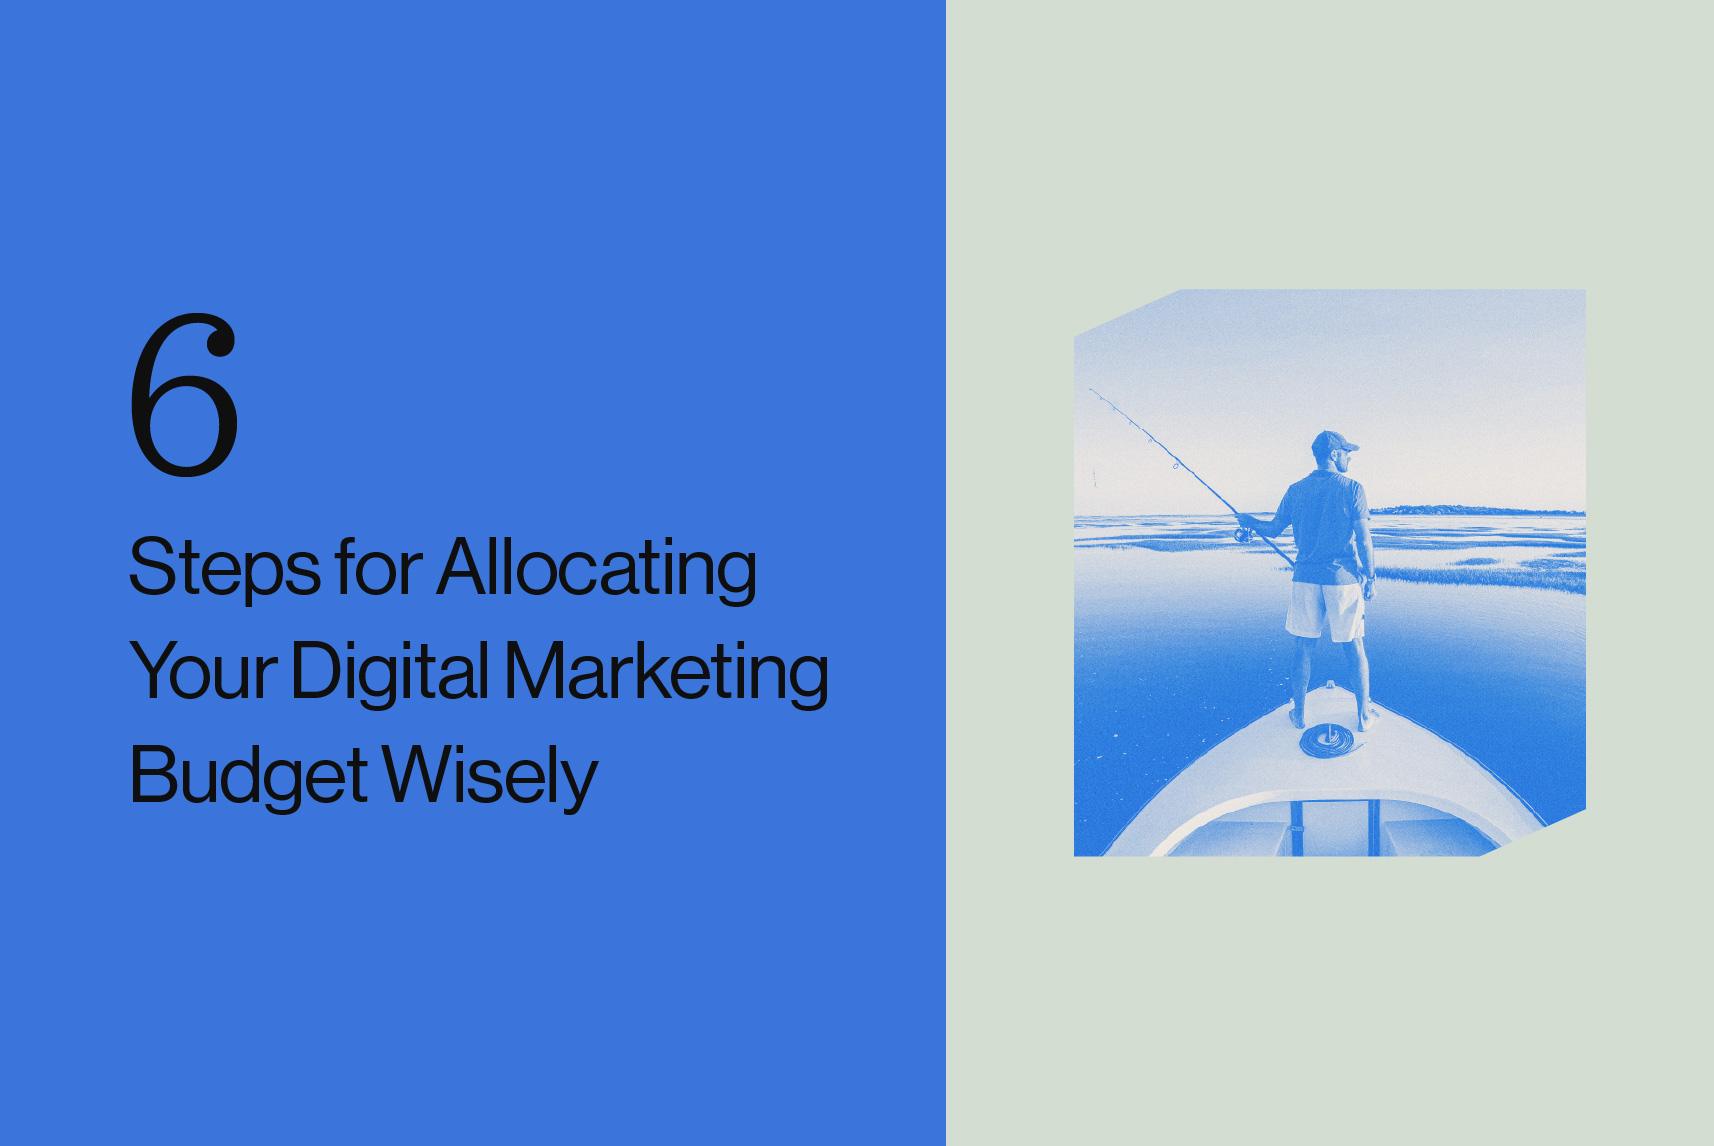 6 Steps for Allocating Your Digital Marketing Budget Wisely